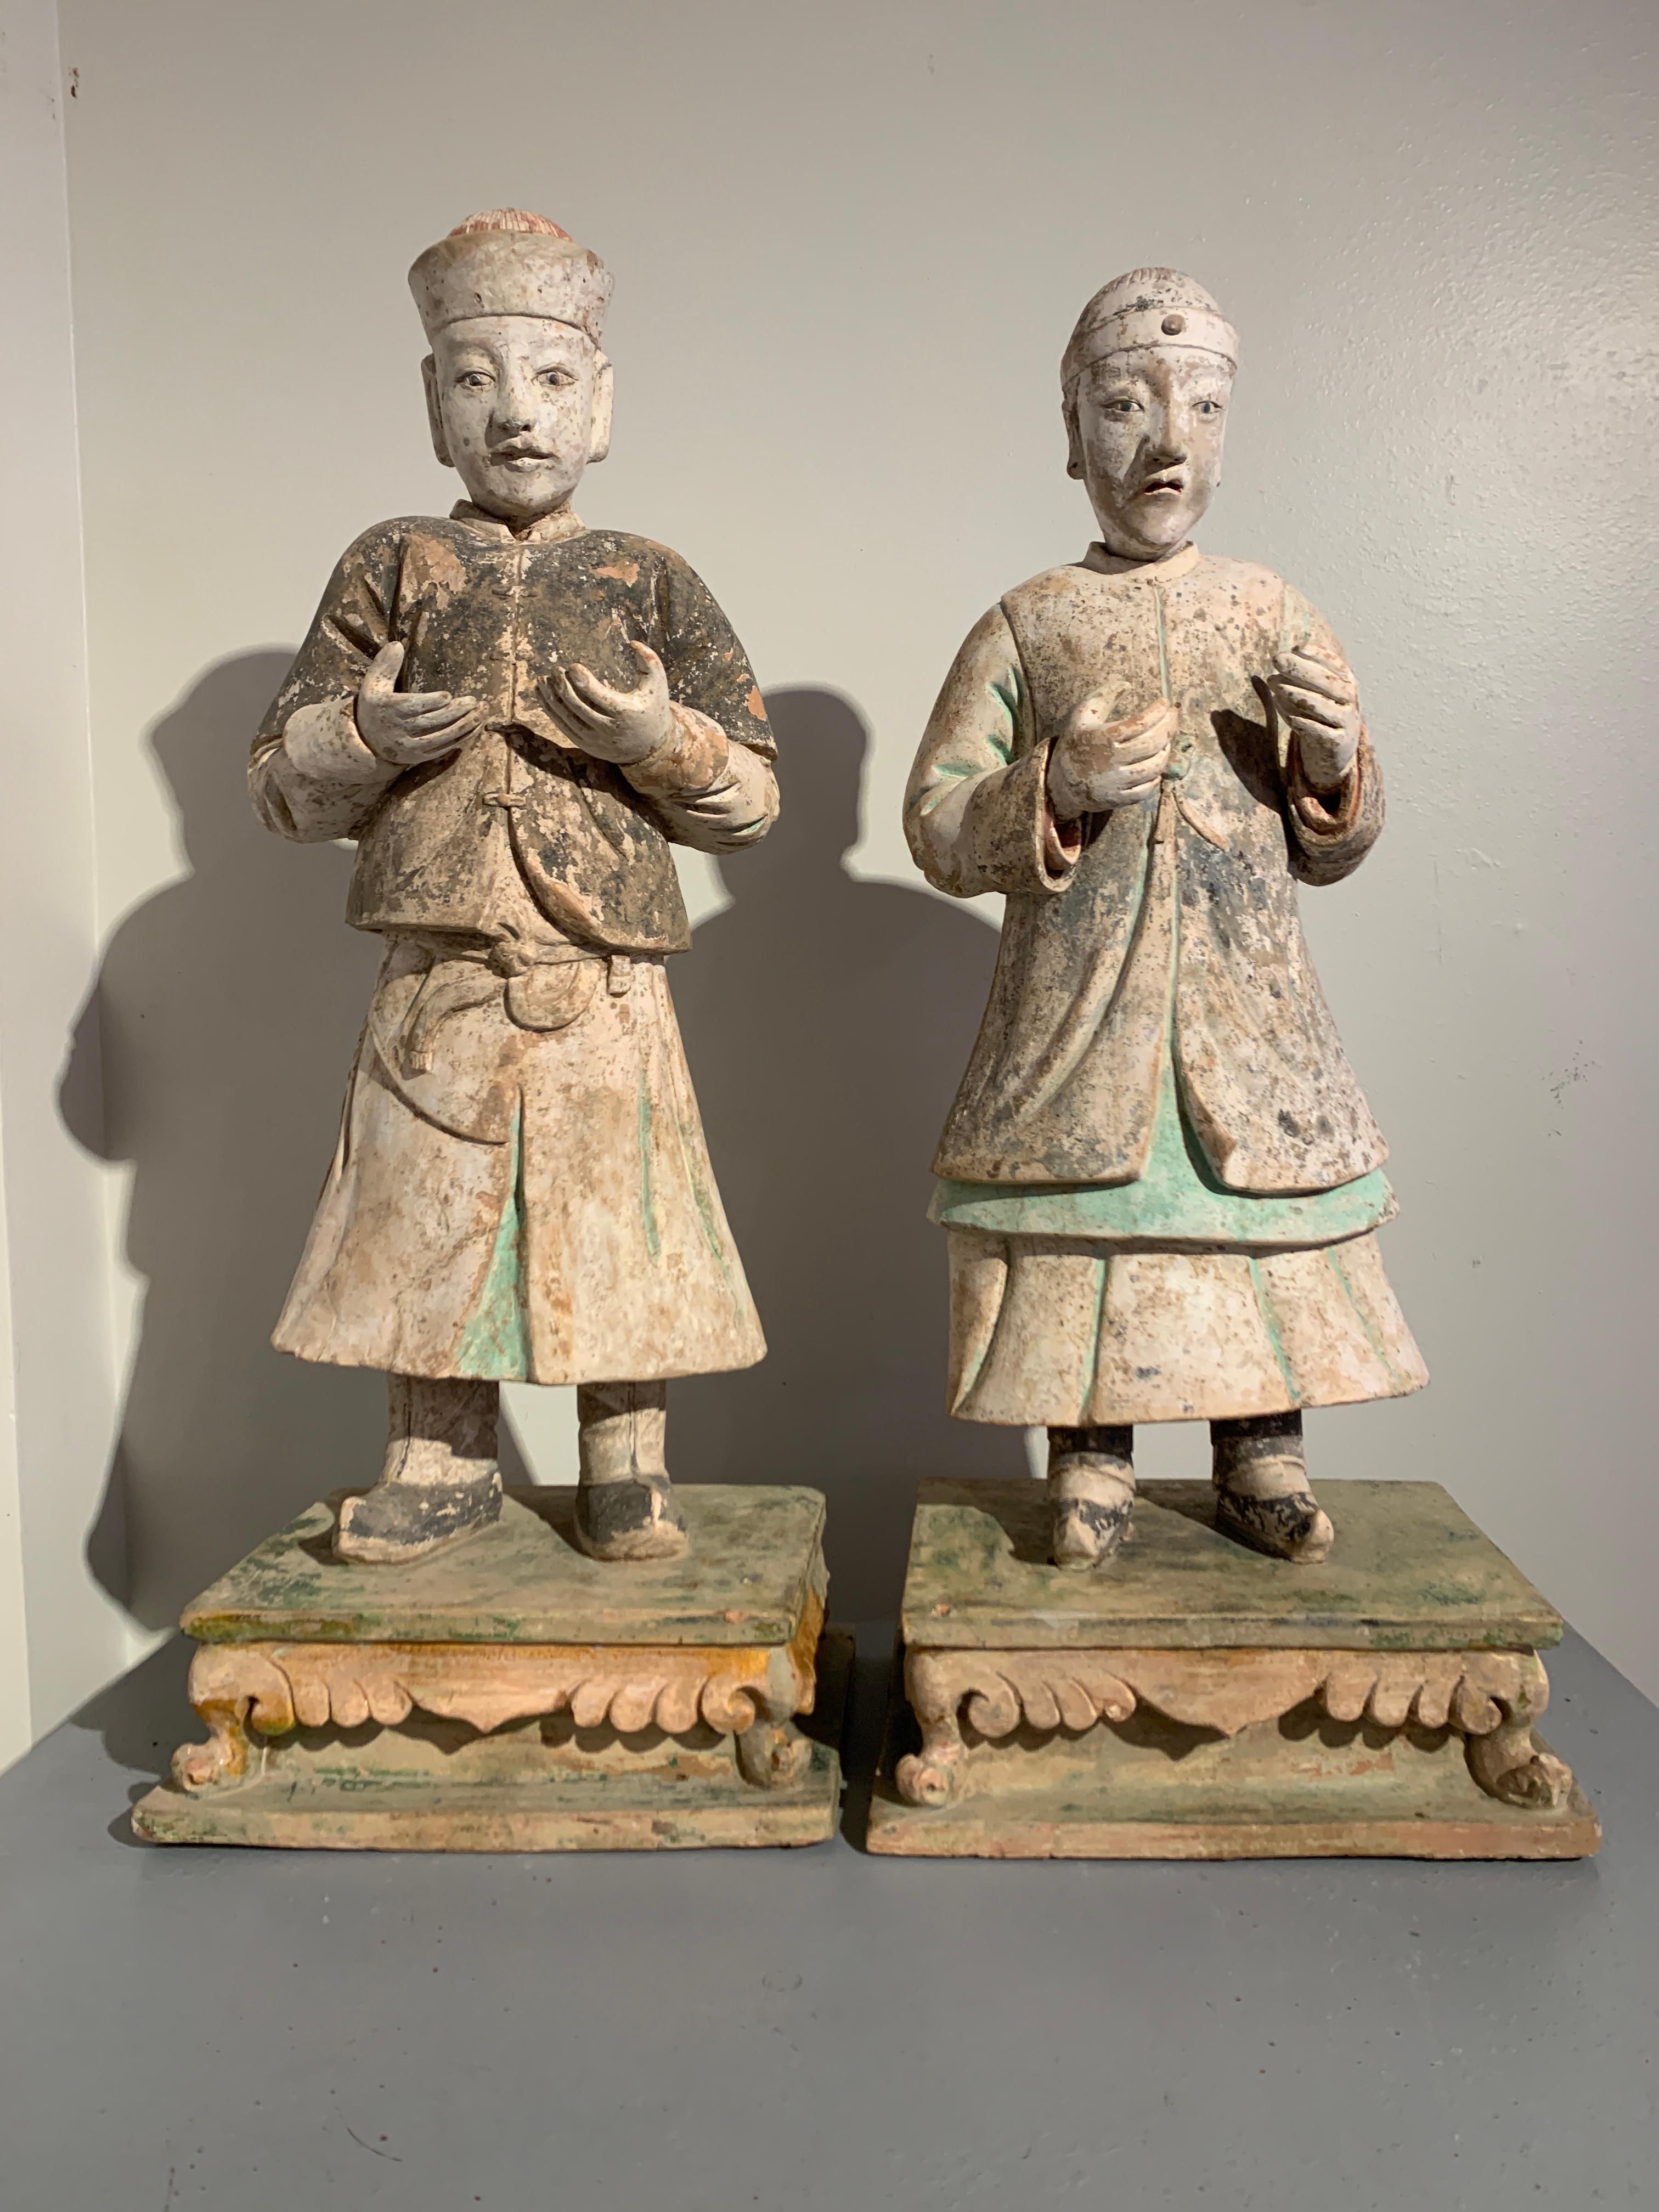 A striking pair of large Chinese glazed and painted pottery figures, Ming Dynasty (1368 to 1644), circa 16th century, China.

The impressive and realistically modeled figures each portrayed standing upright upon a sancai (three color) glazed